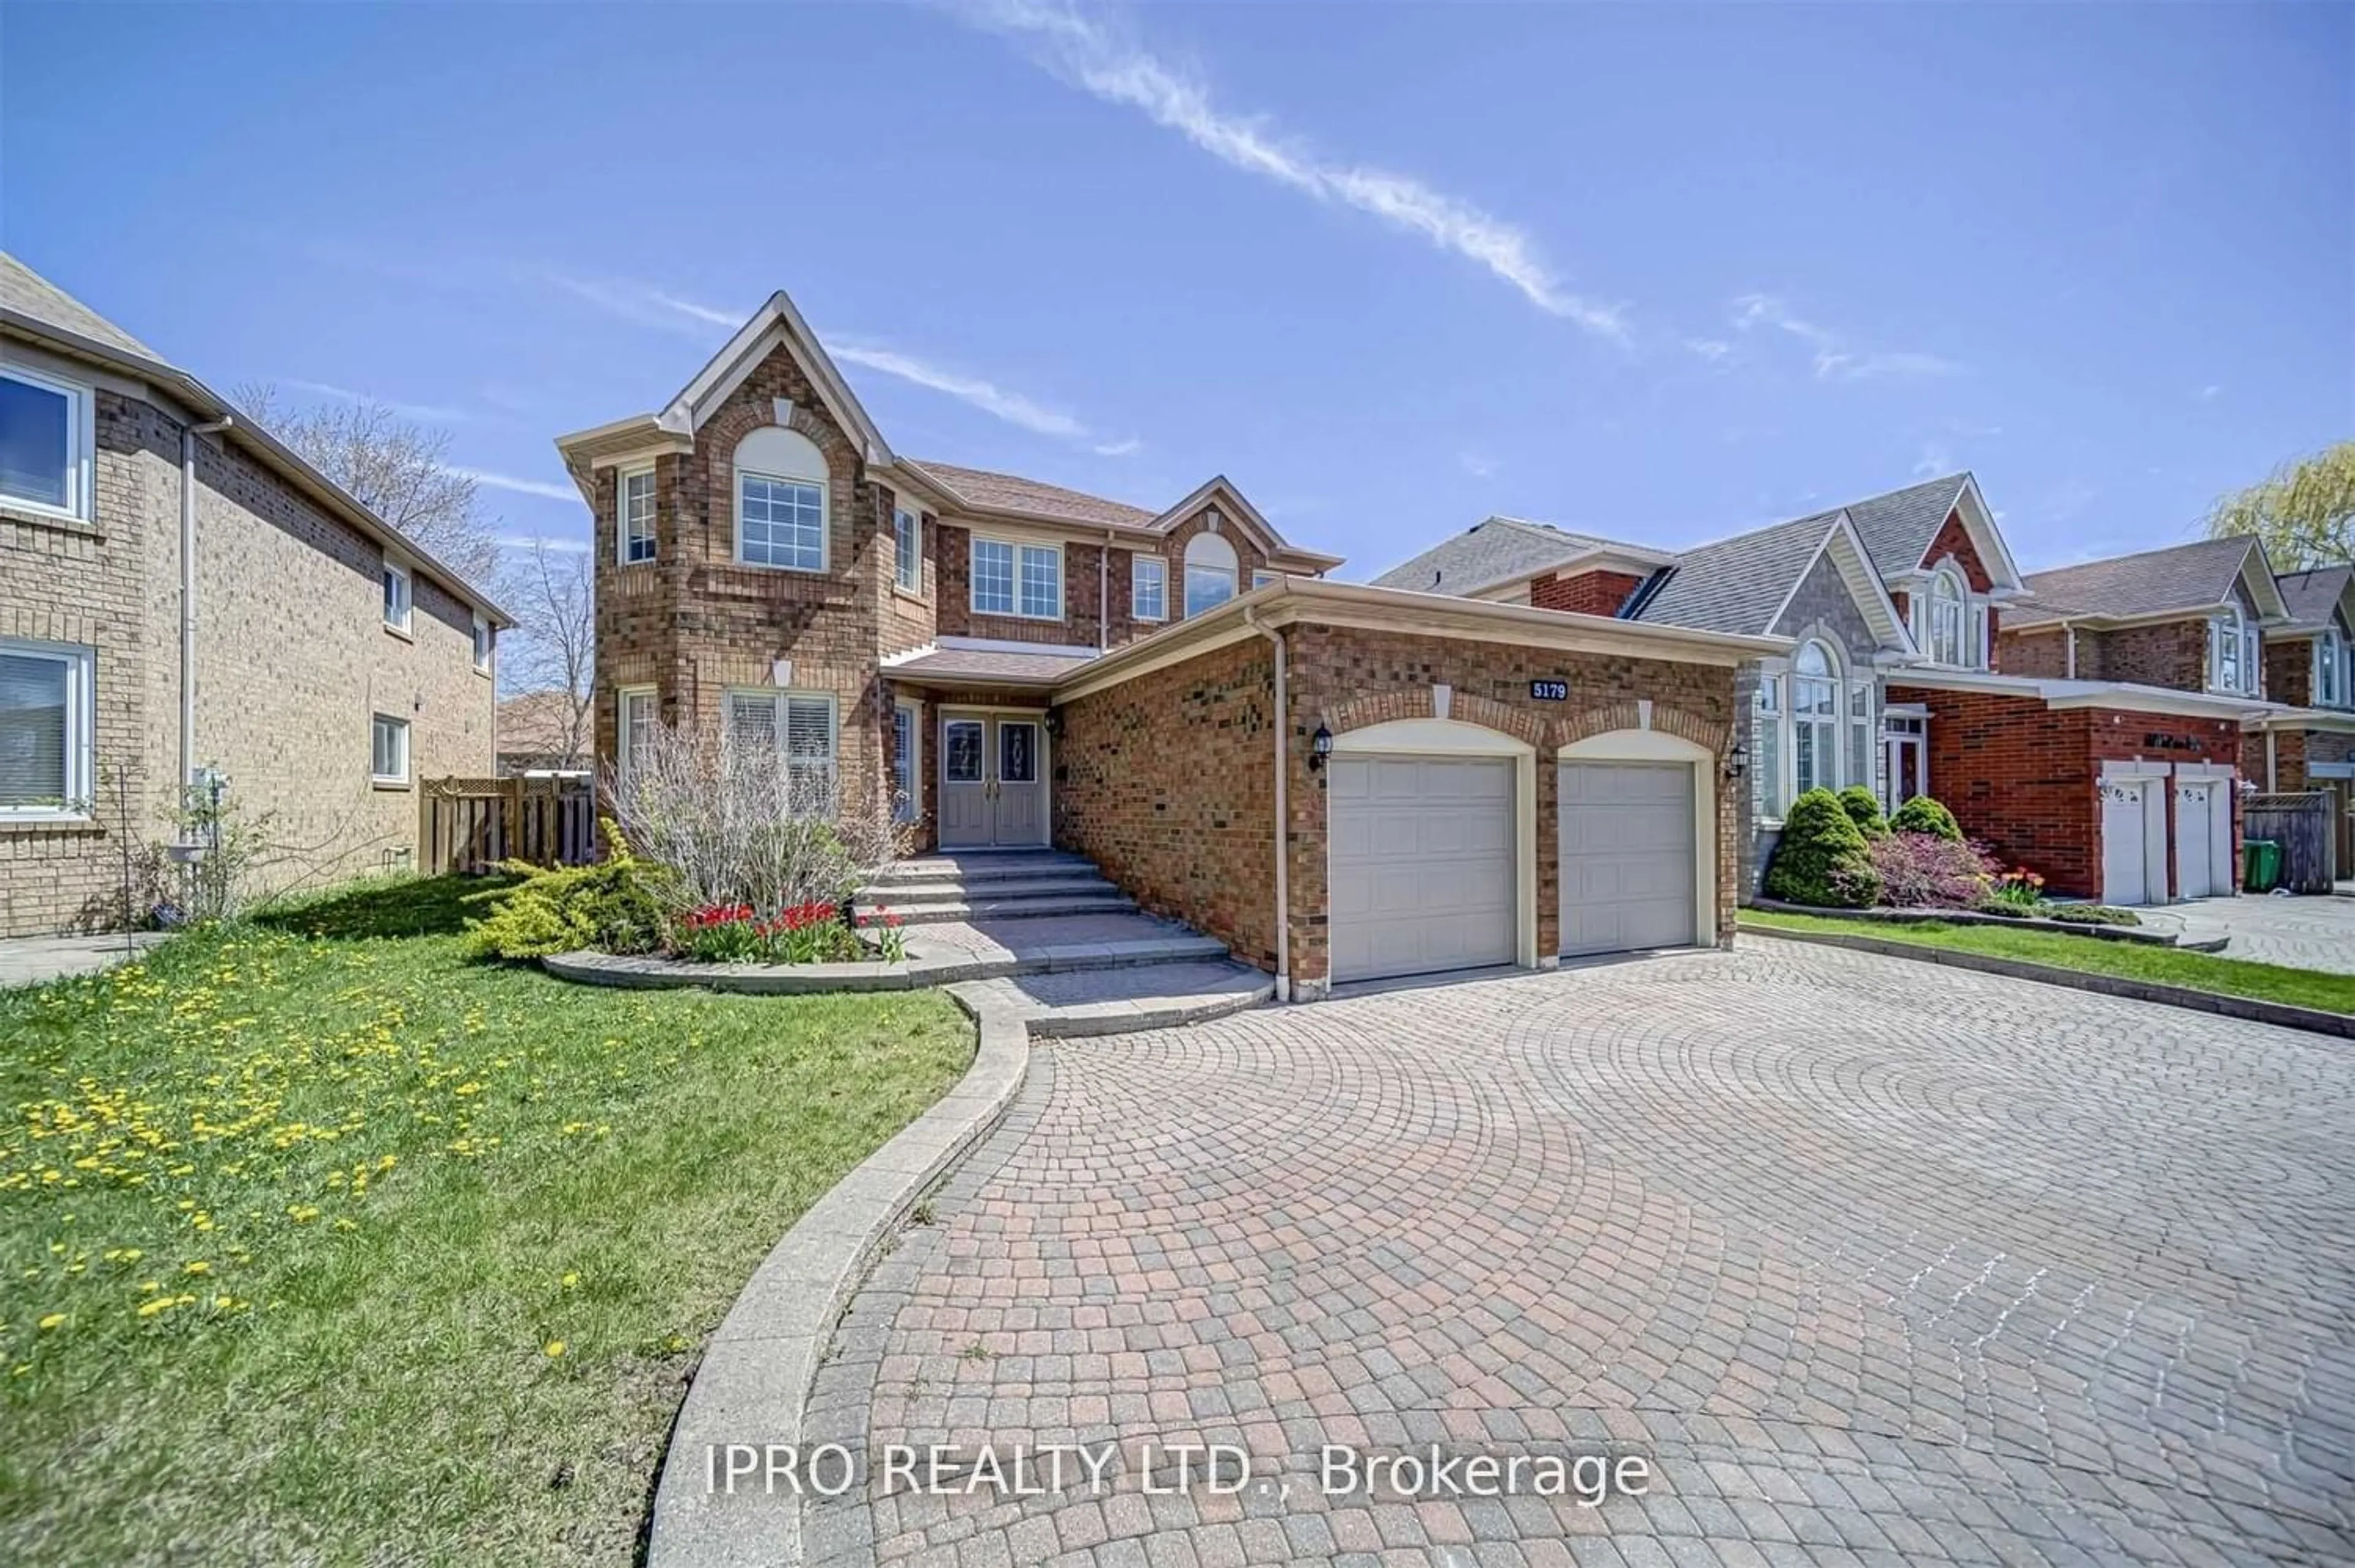 Home with brick exterior material for 5179 Creditview Rd, Mississauga Ontario L5V 1R8